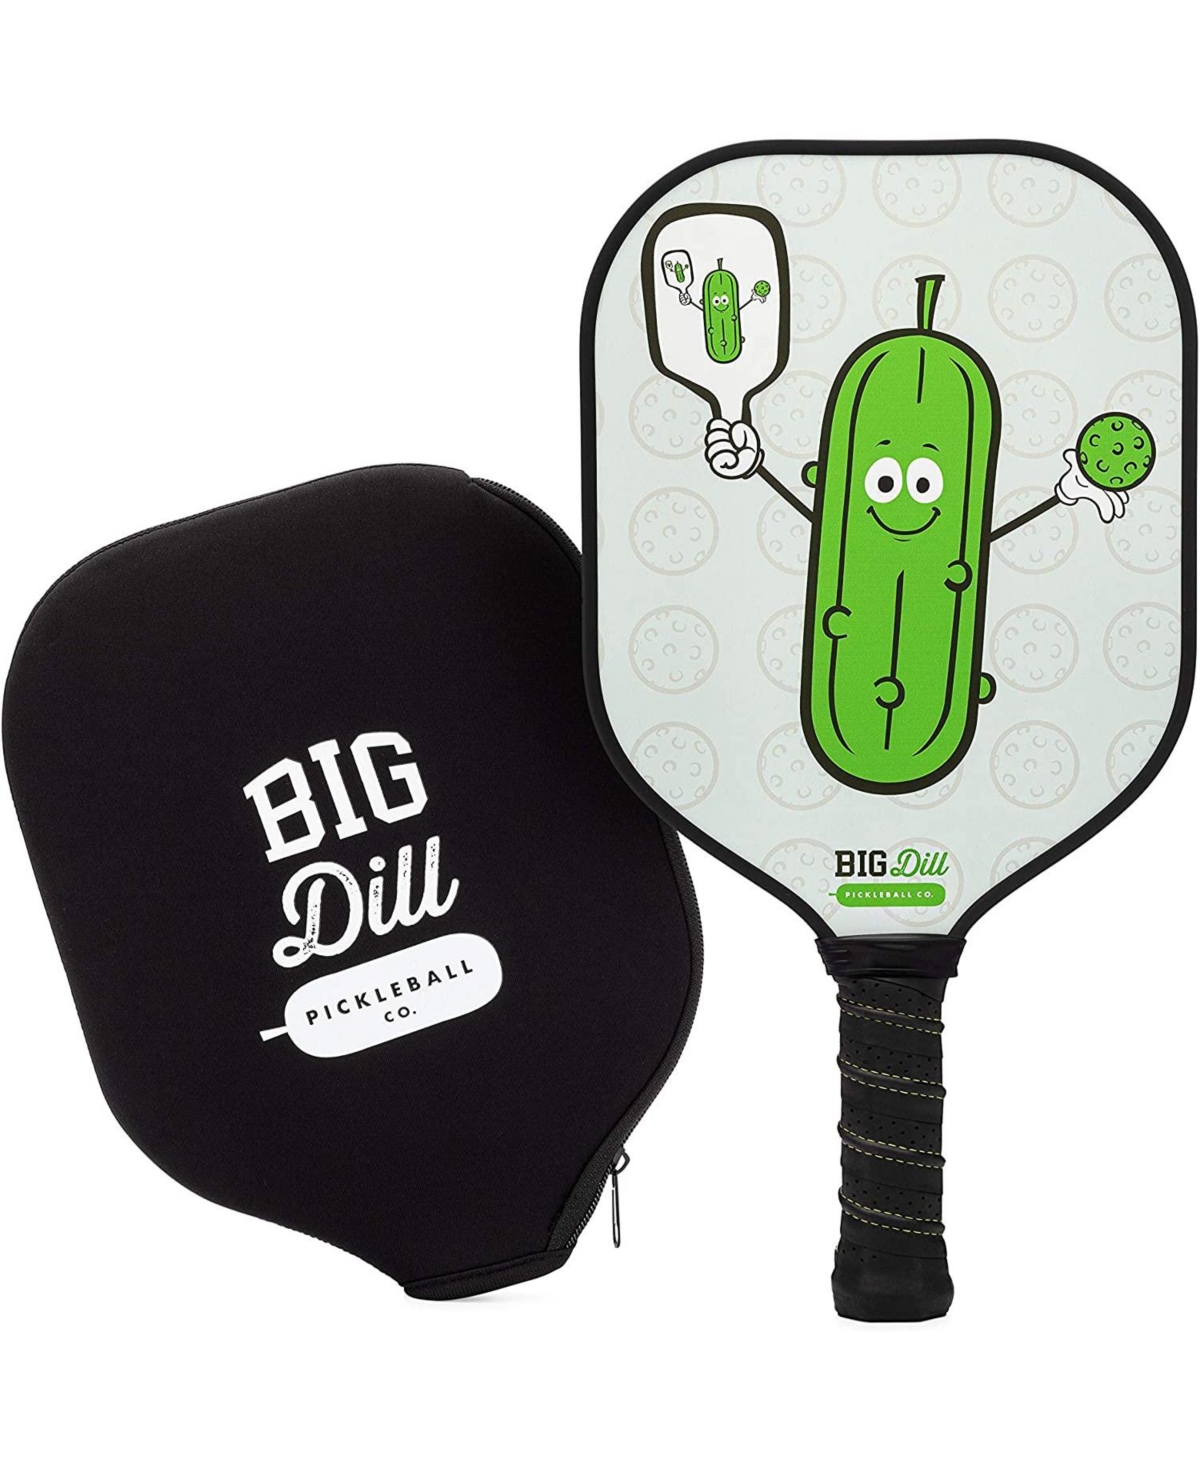 Infinity Fiberglass Composite Pickleball Paddle with Cover - Green